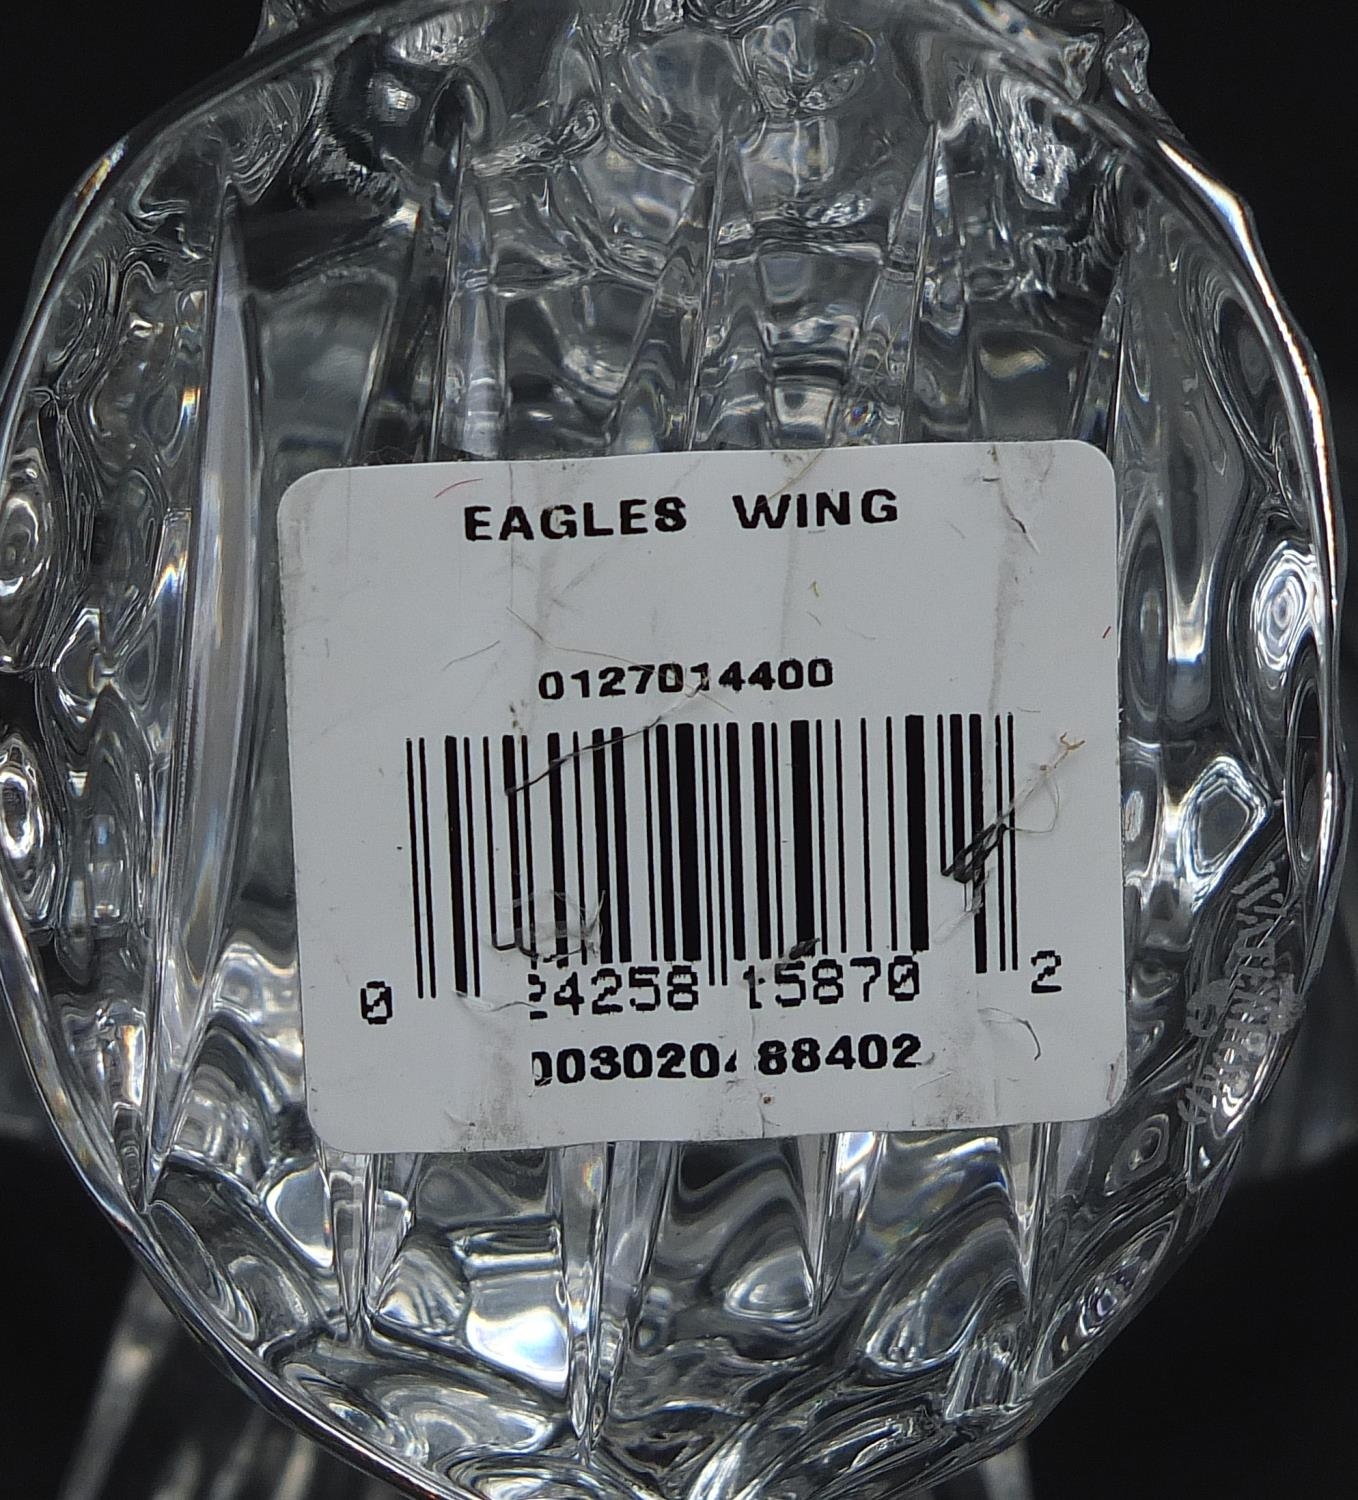 Waterford Crystal eagle with paper label, 17.5cm high - Image 4 of 4